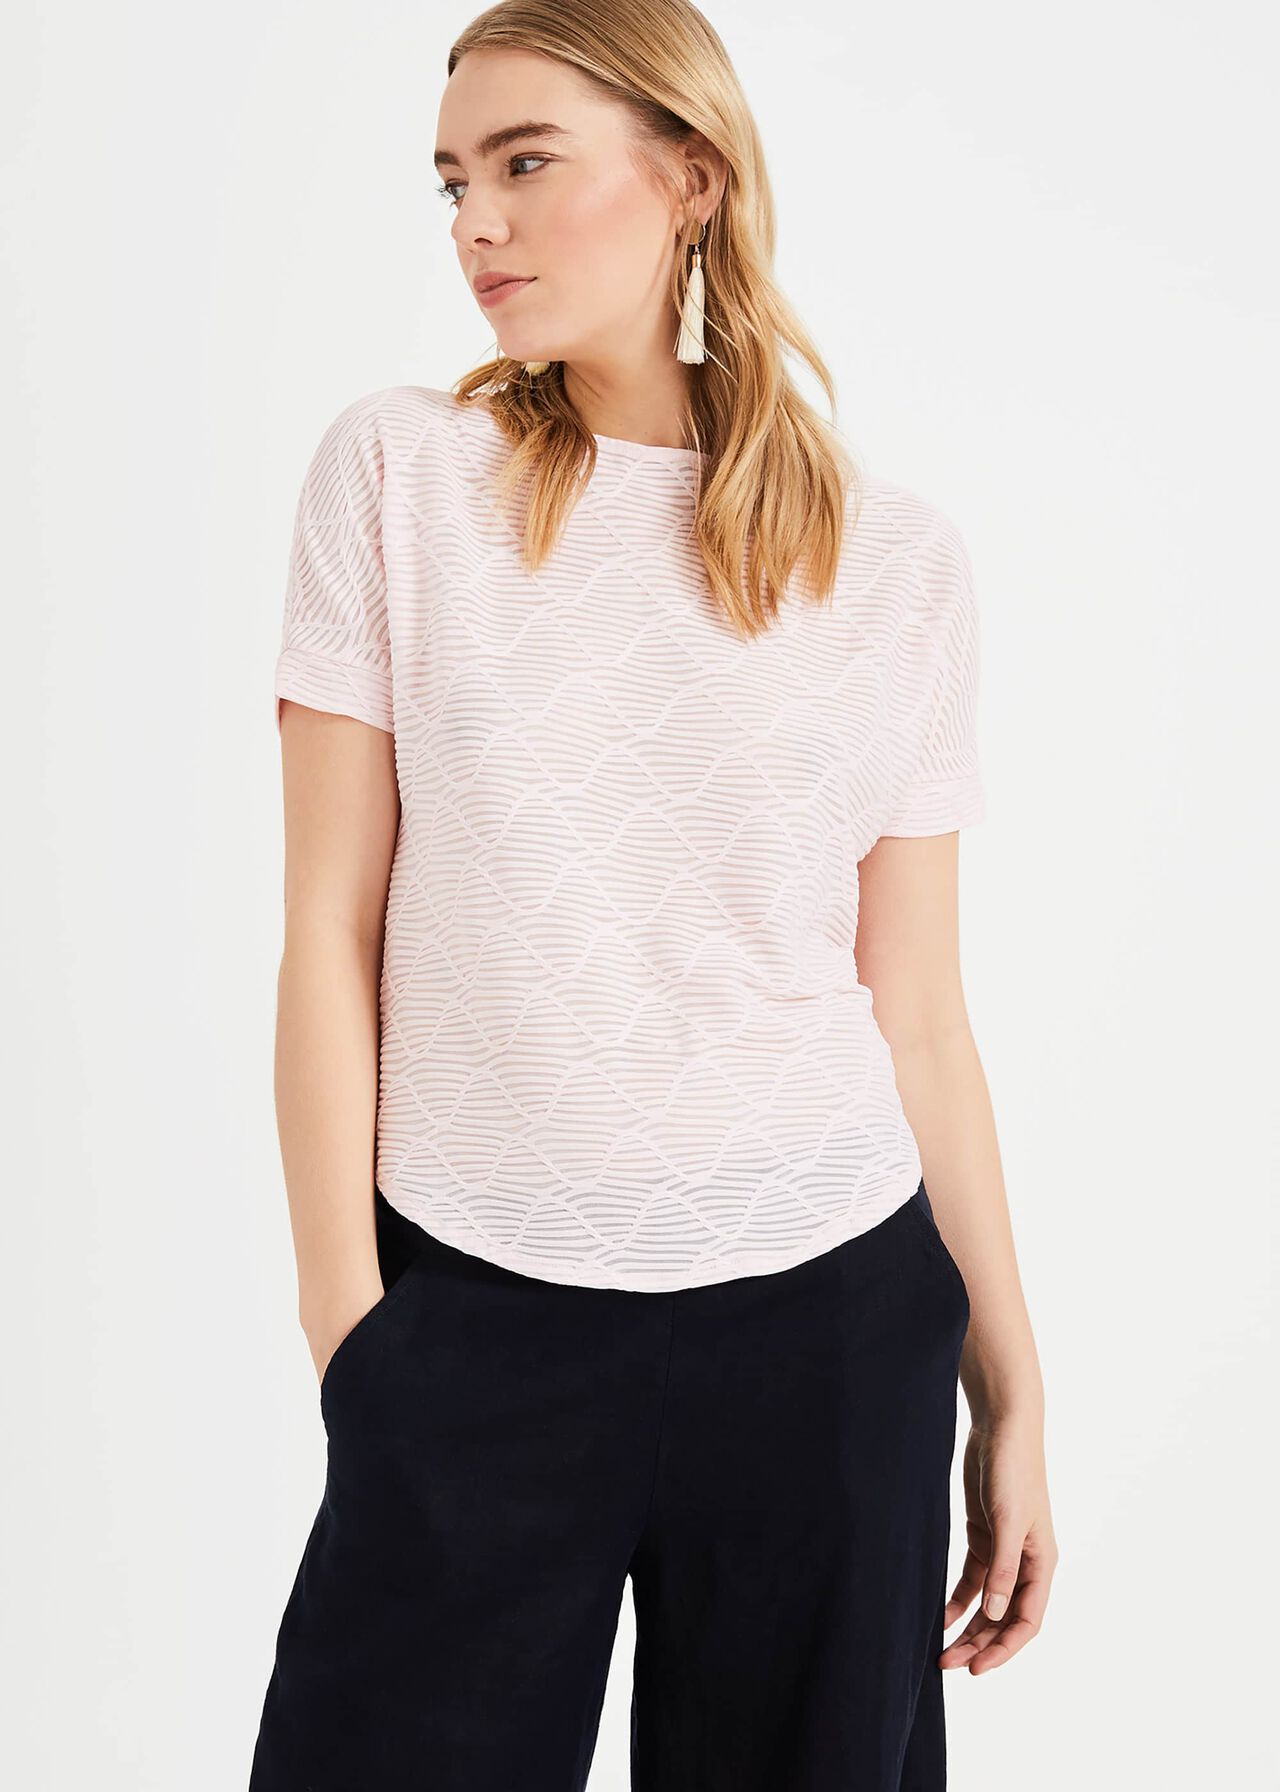 Quinby Textured Top